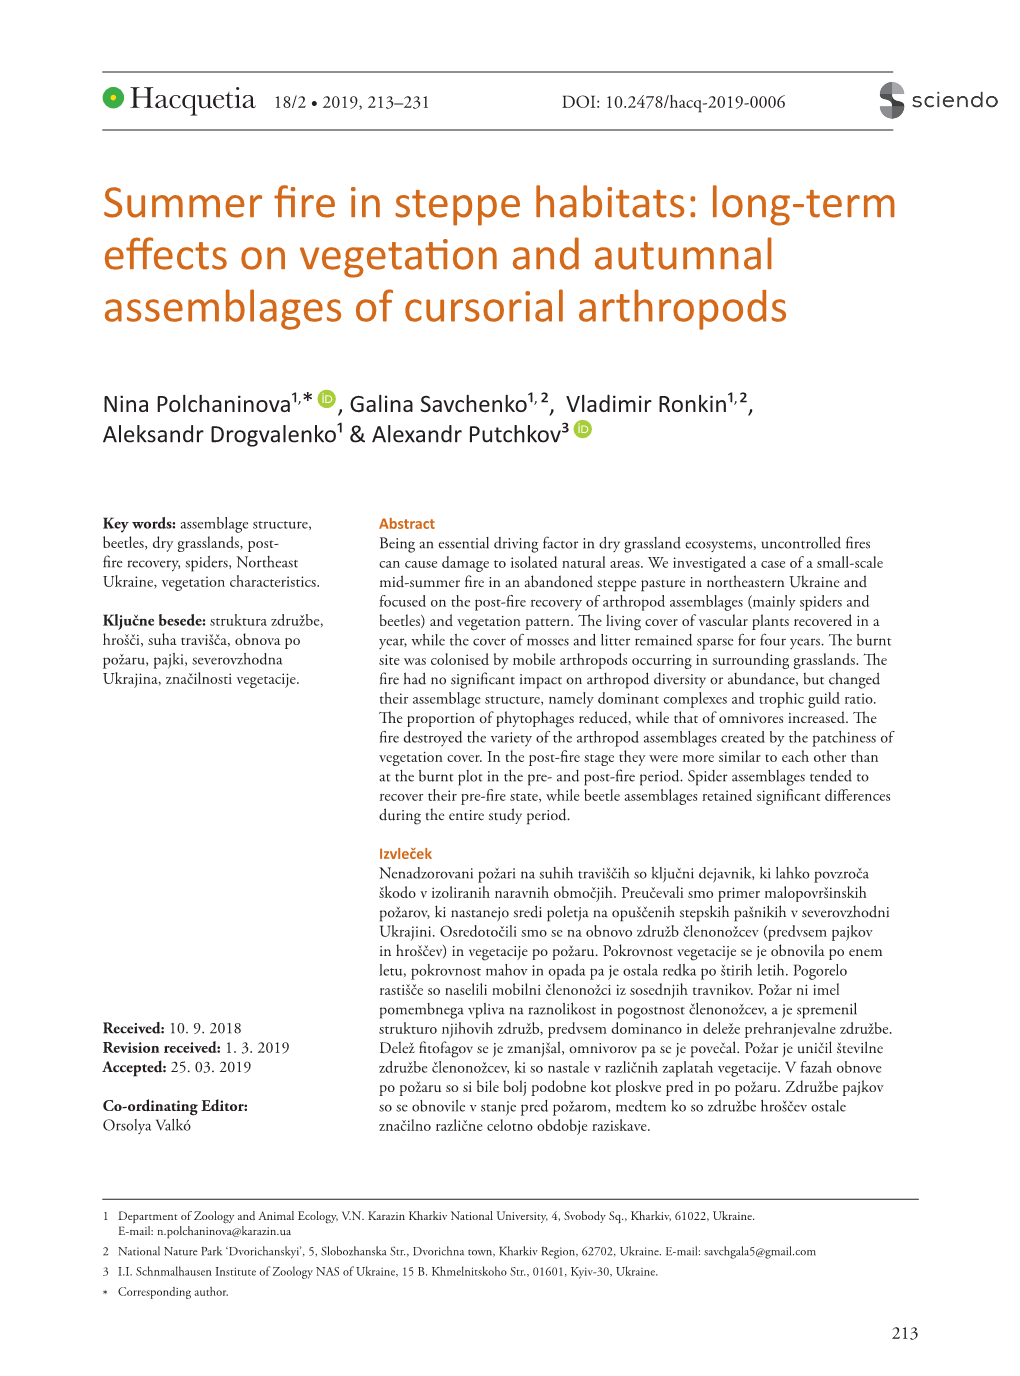 Summer Fire in Steppe Habitats: Long-Term Effects on Vegetation and Autumnal Assemblages of Cursorial Arthropods